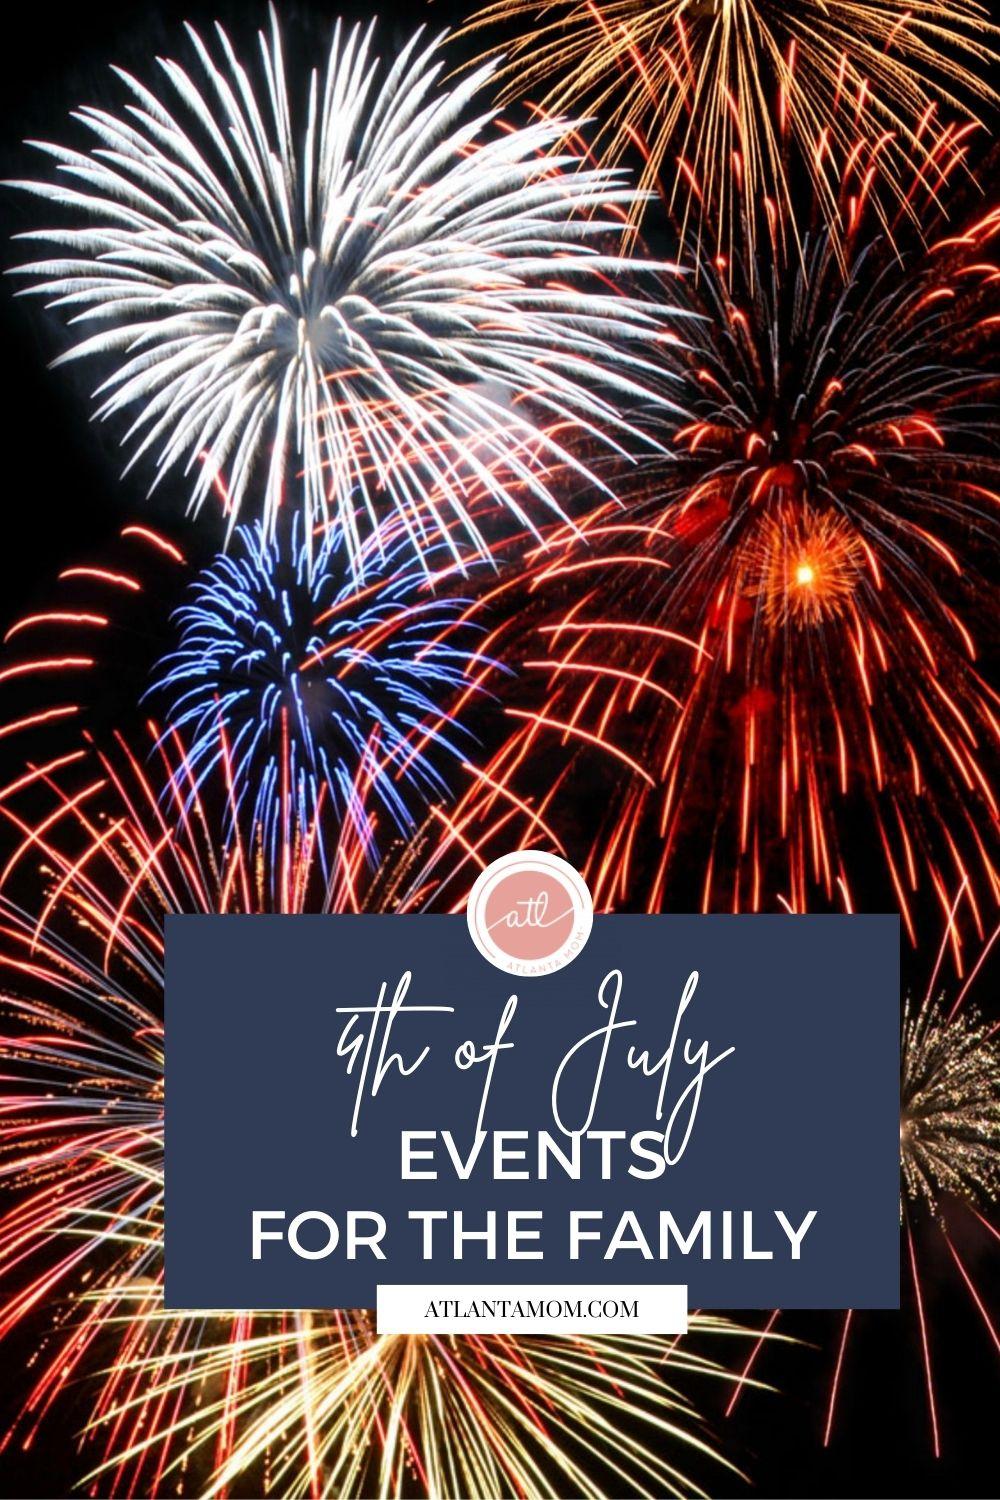 4th of July Events for the Family - Pinterest